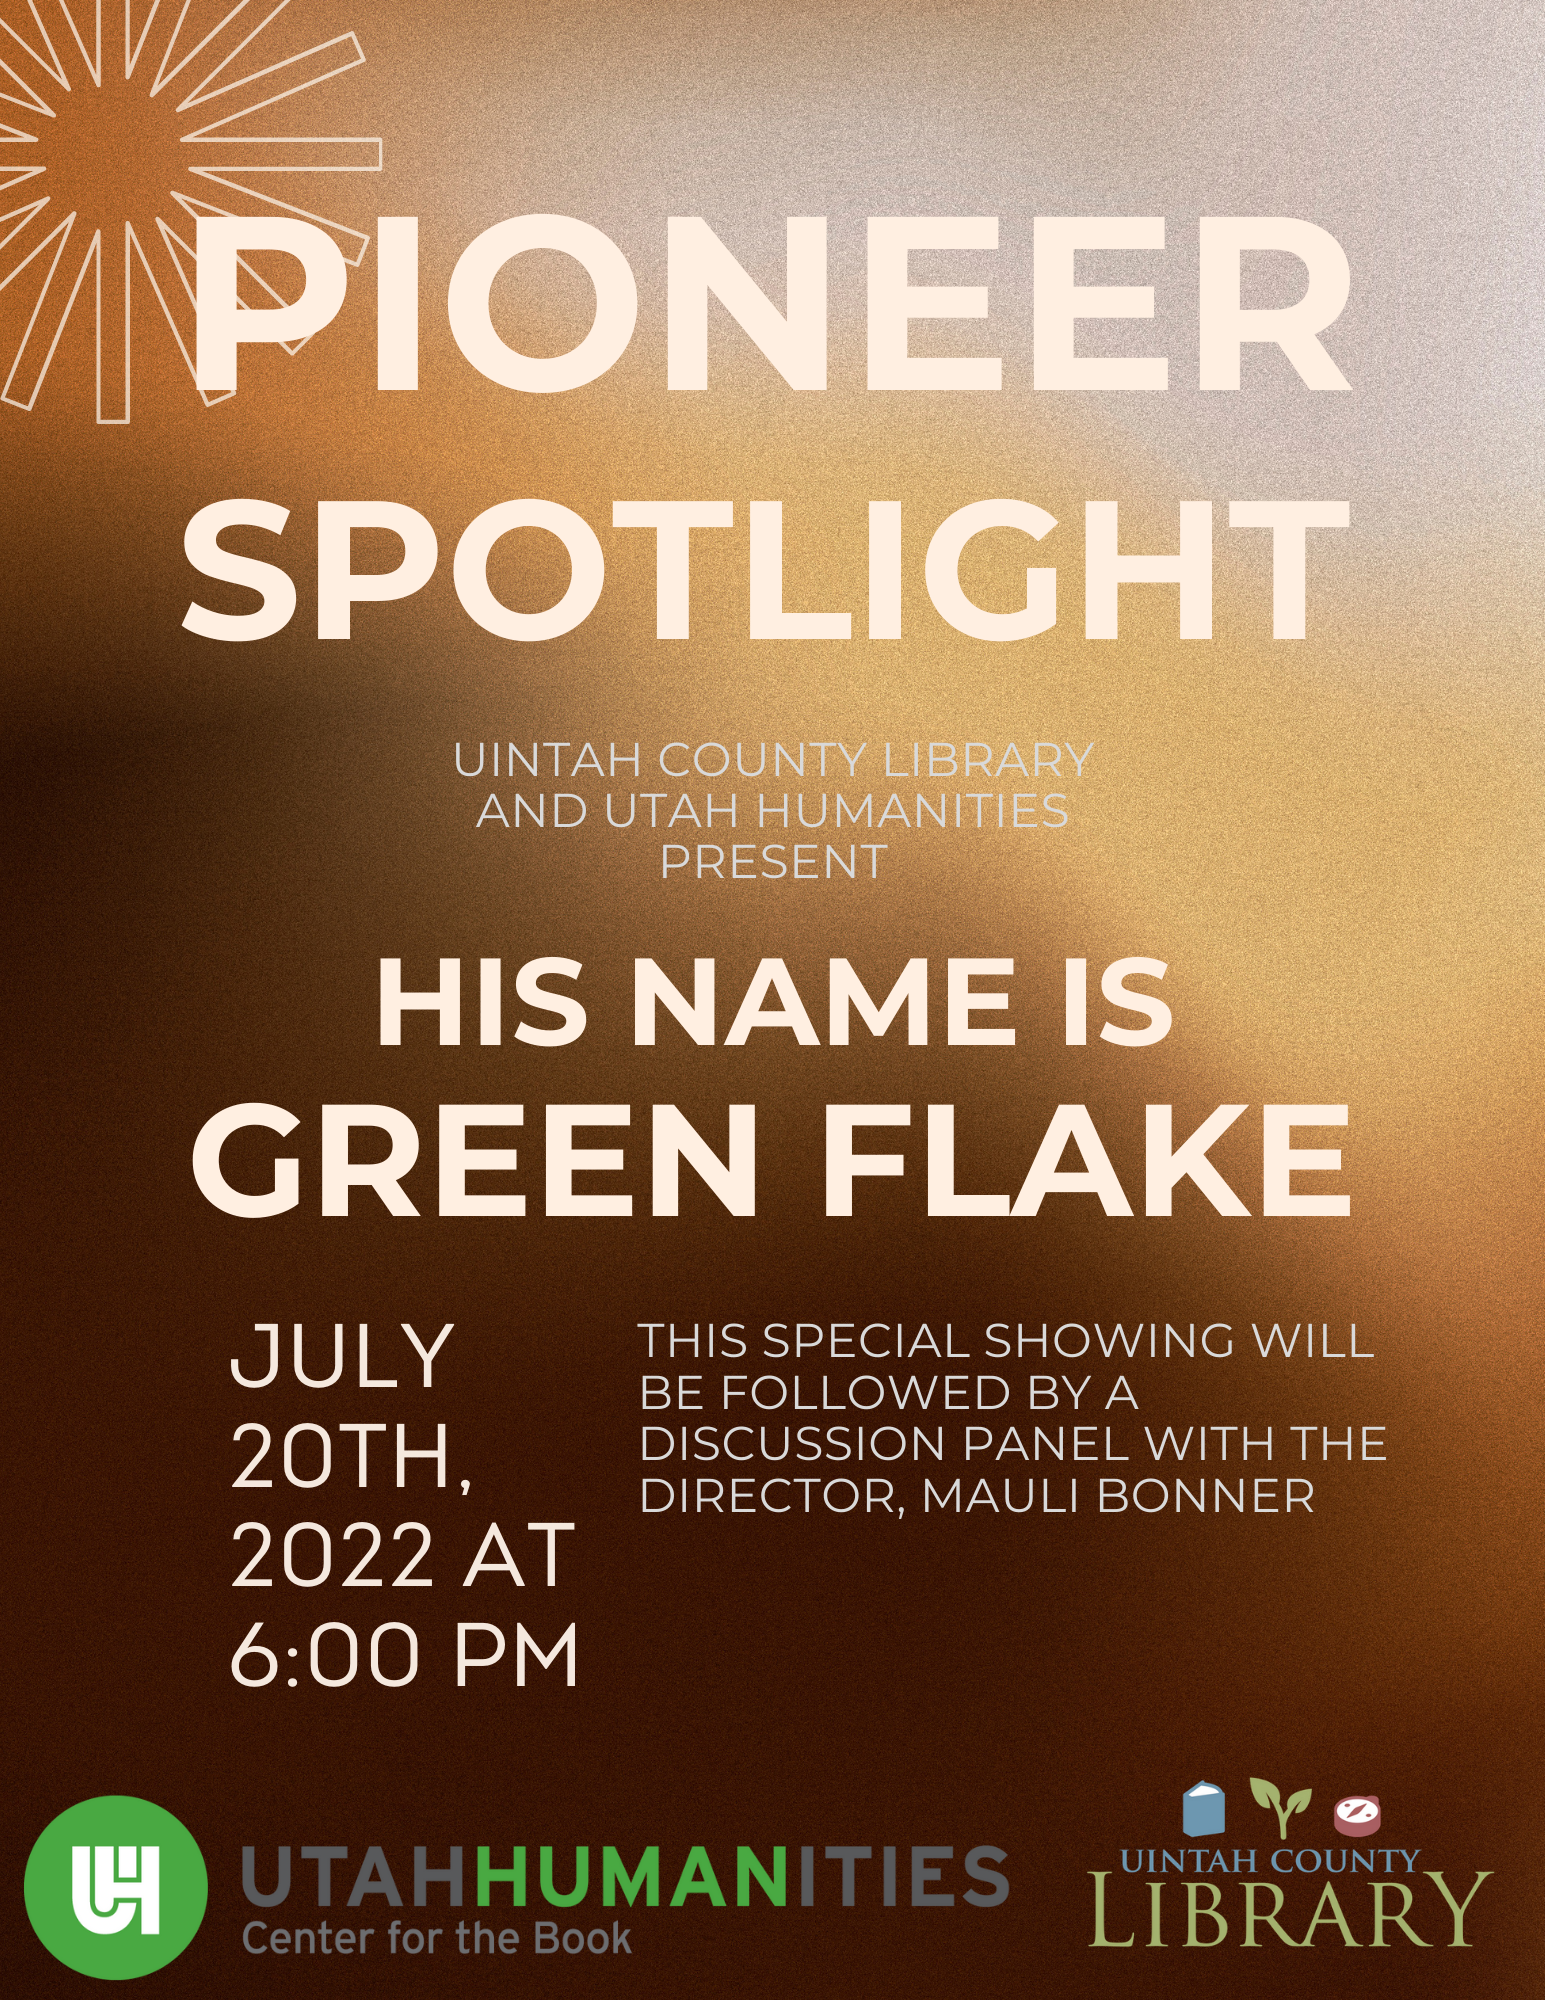 Brown background with white text; Utah Humanities and Uintah County Library logos at the bottom; "Pioneer Spotlight | Uintah County Library and Utah Humanities Present | His Name Is Green Flake | July 20th, 2022 at 6:00 pm | This special showing will be followed by a discussion panel with the director, Mauli Bonner"